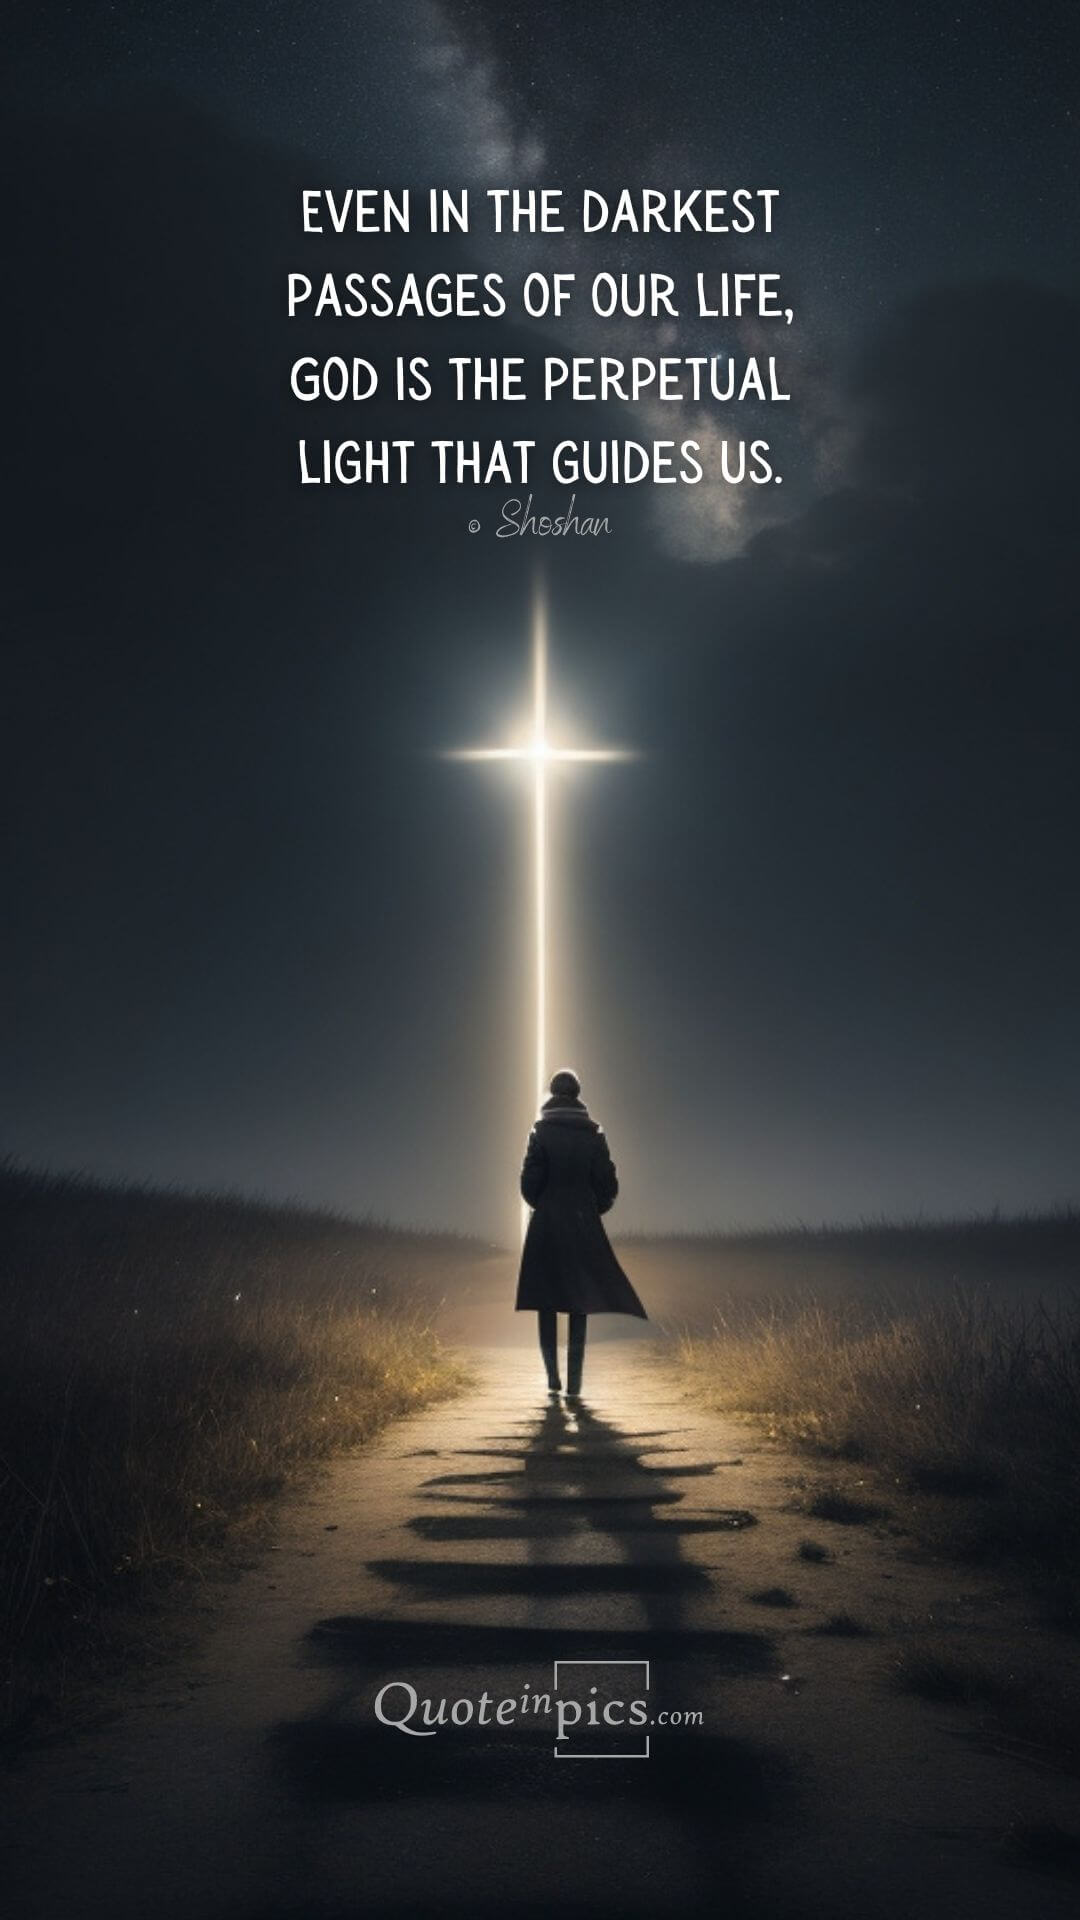 Even in the darkest passages of our life, God is the perpetual light that guides us